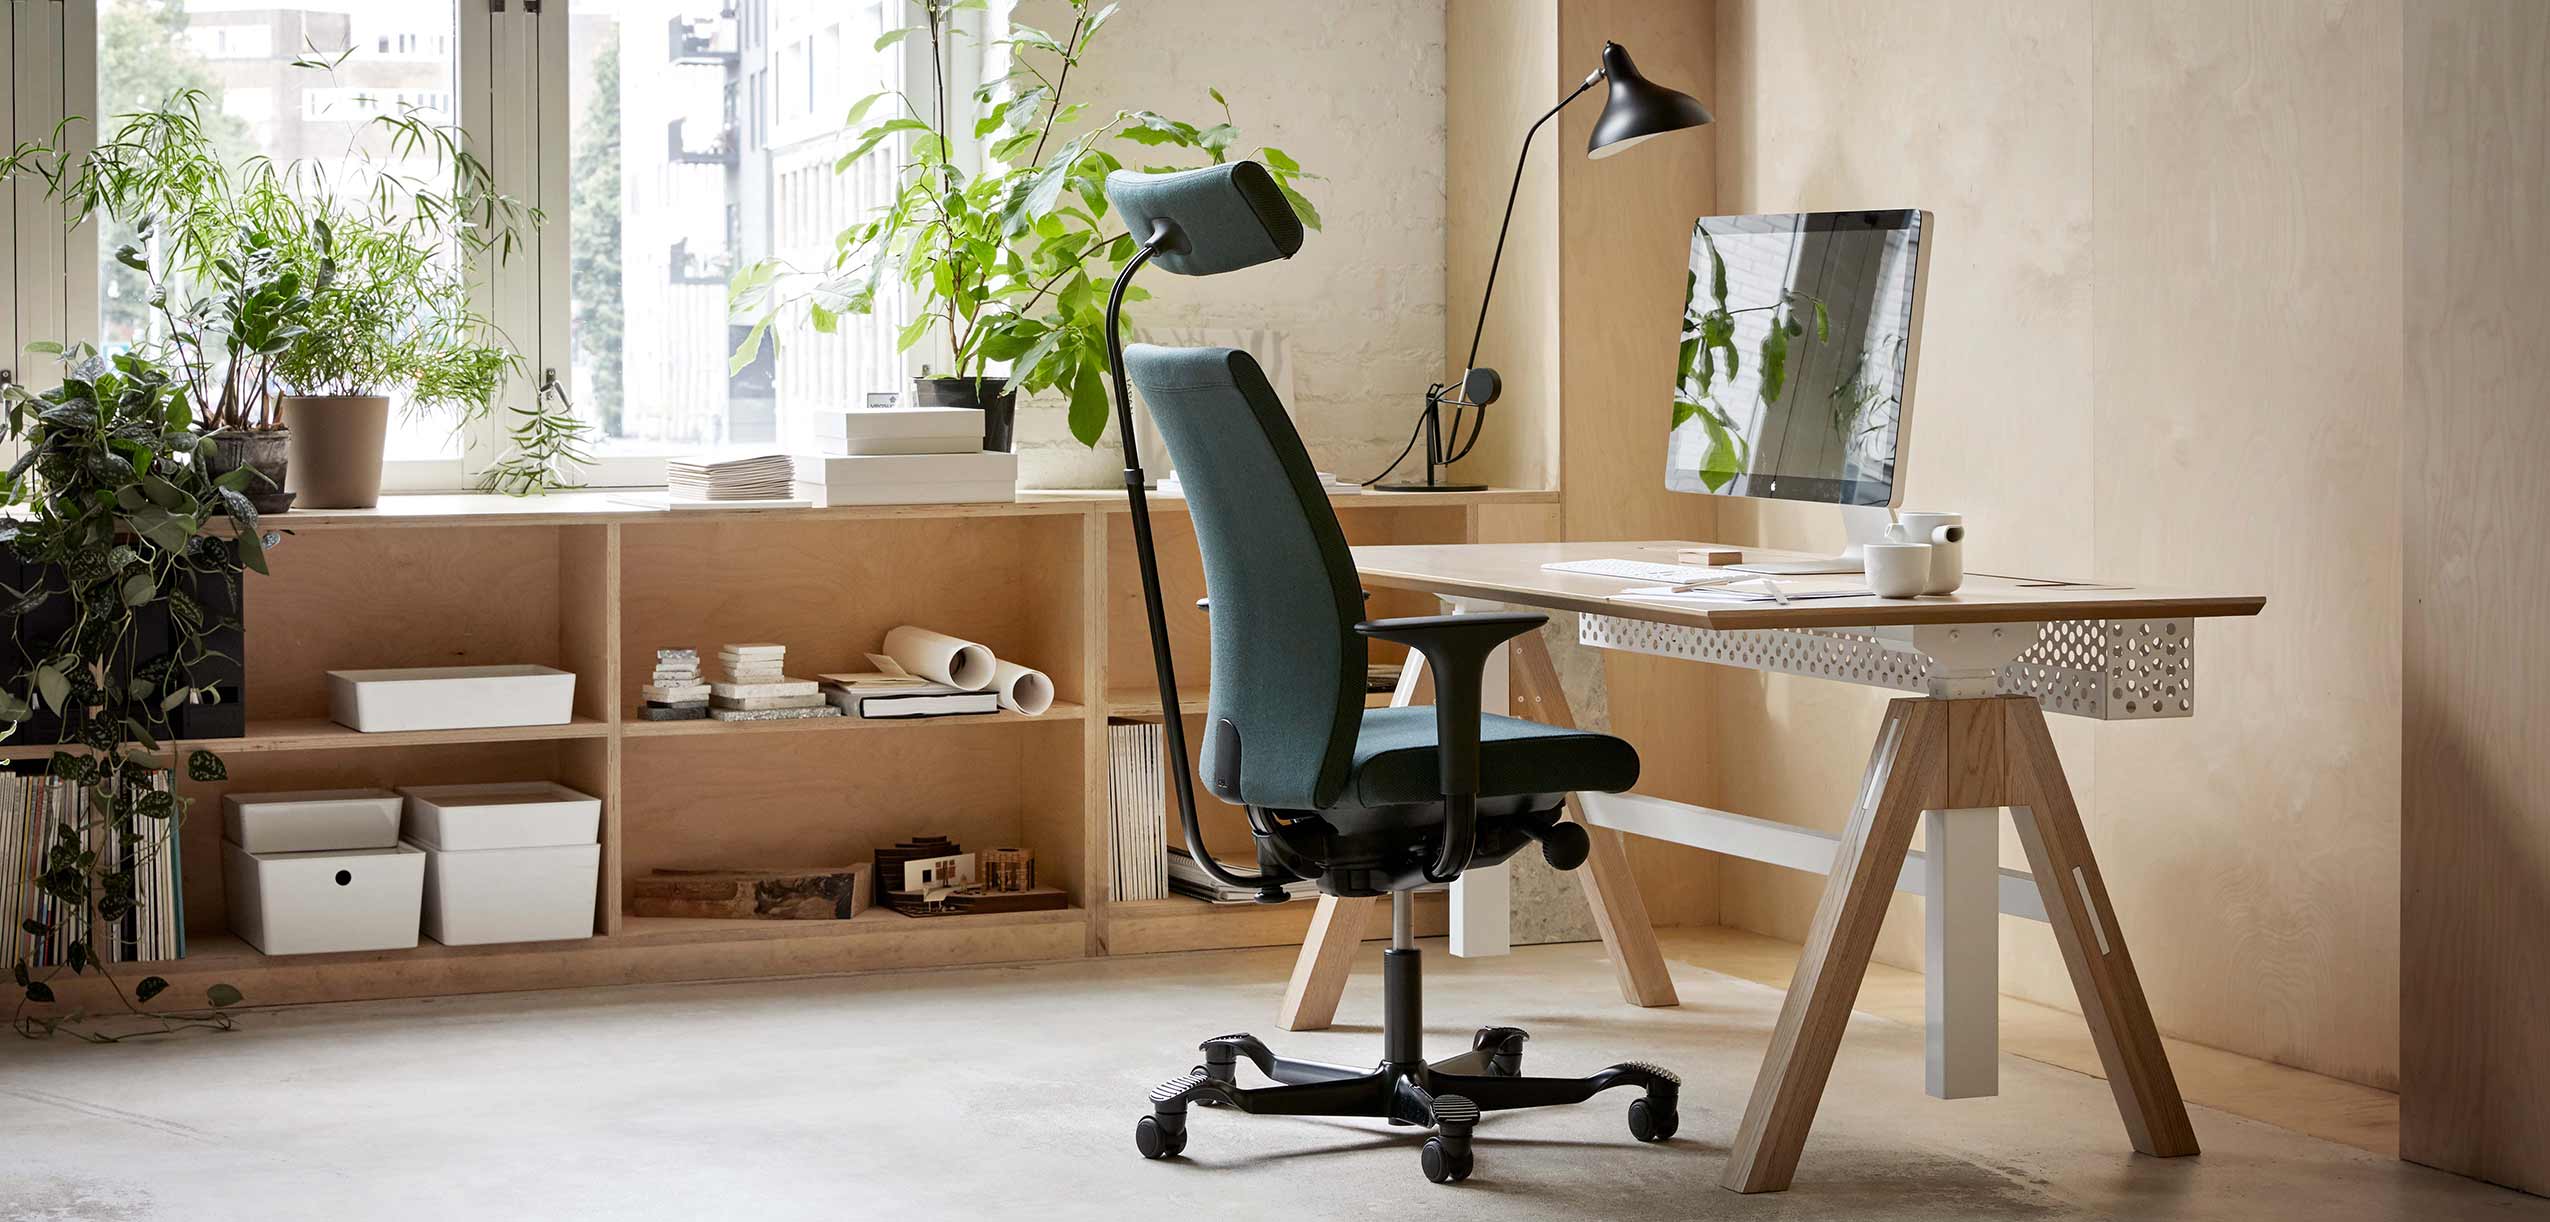 dark green HÅG Creed chair at a wooden height adjustable desk with an apple mac on it in a light office